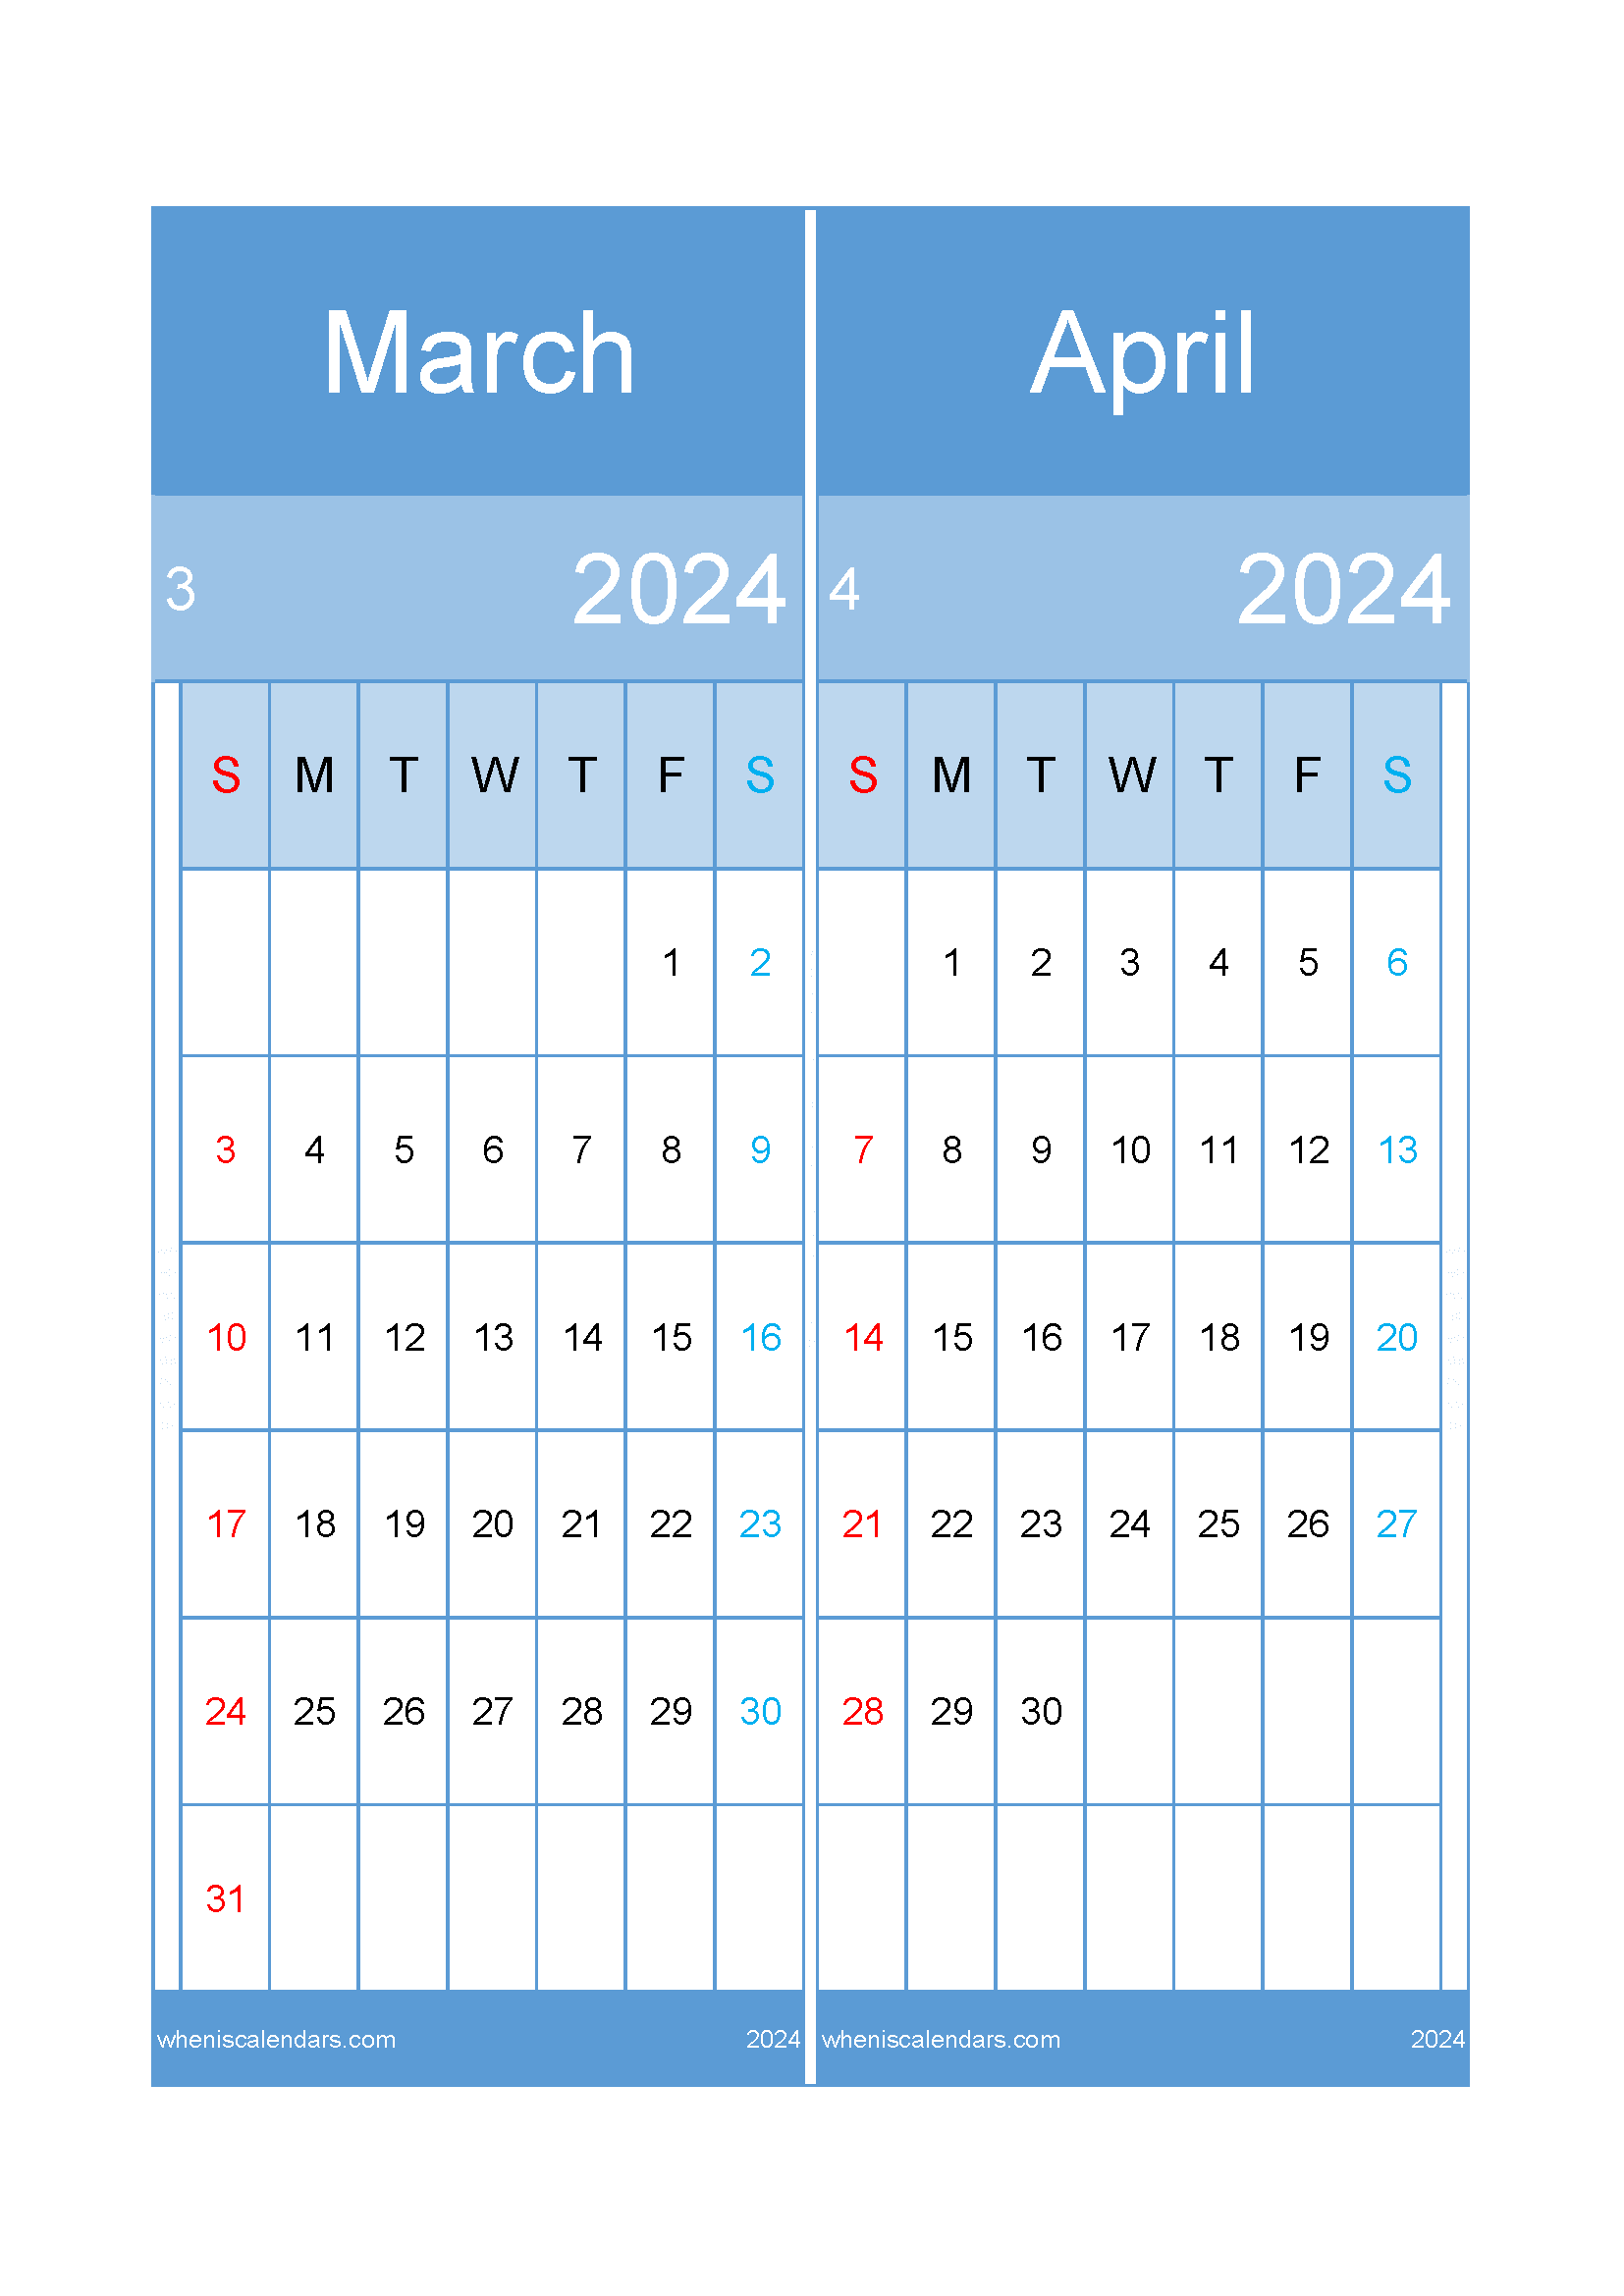 Calendar Mar and April 2024 Two-Month